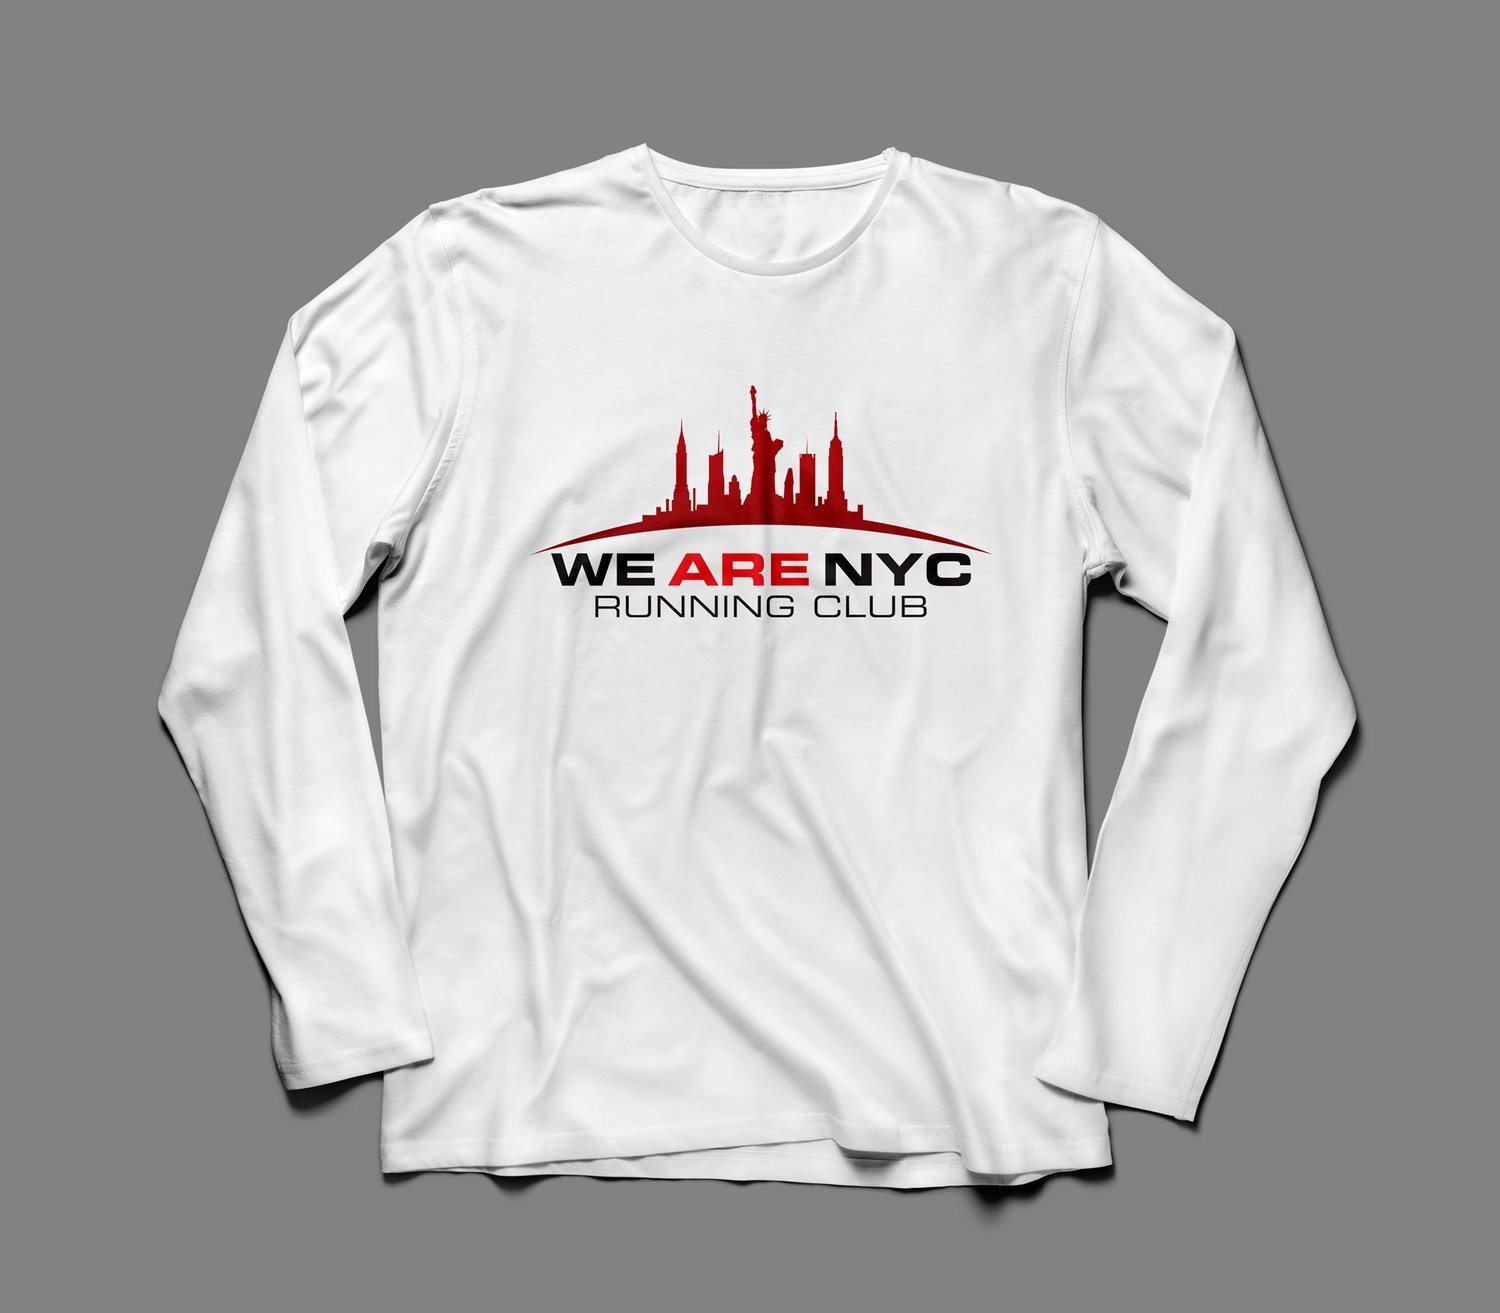 WE ARE NYC OFFICIAL RACE DAY LONG SLEEVE T-SHIRT (black or white)